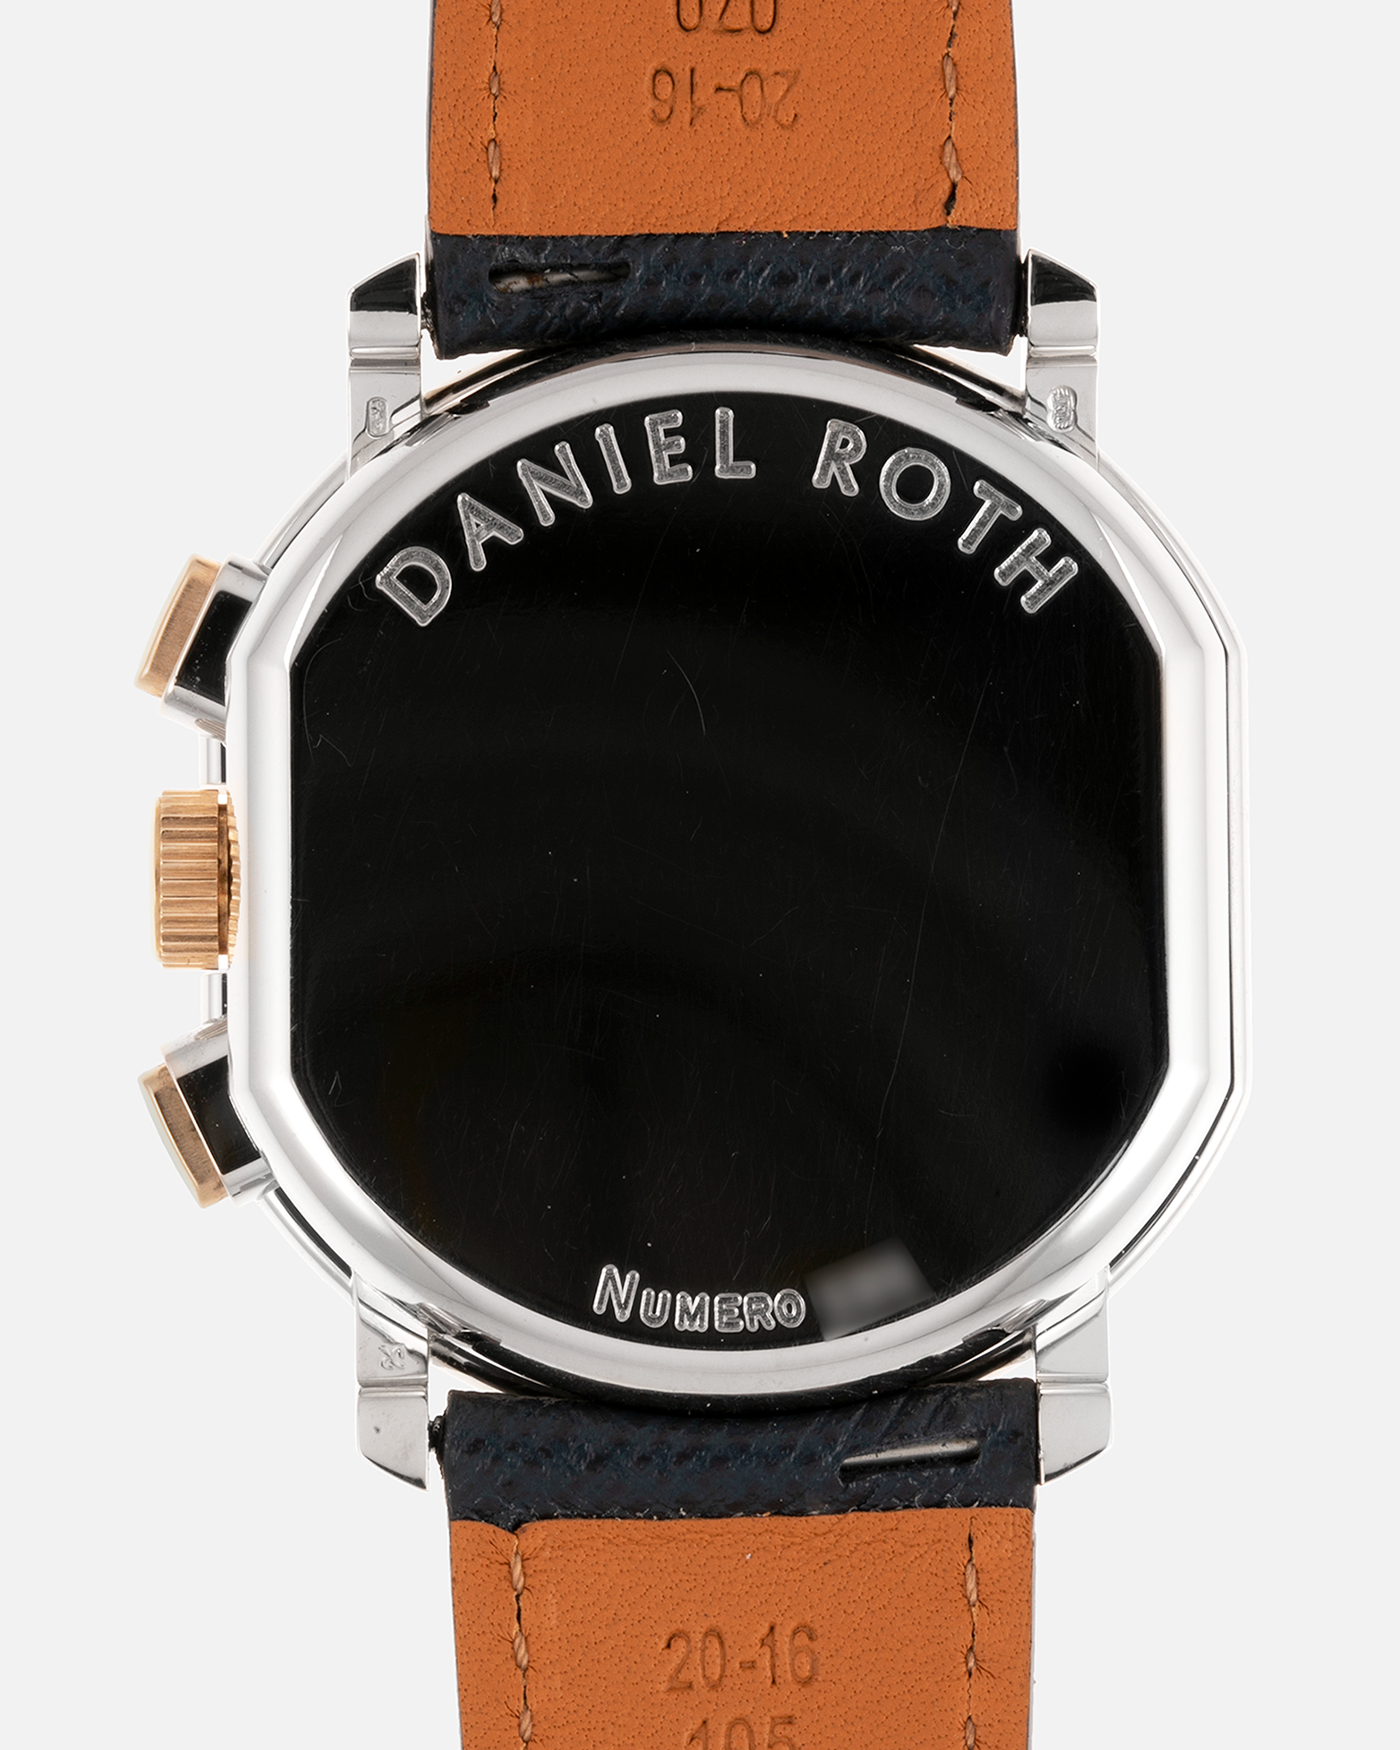 Brand: Daniel Roth Year: 1990’s Model: 2147 Material: 18k White Gold and 18k Yellow Gold Movement: Lemania 2320 Case Diameter: 35mm X 38mm Strap: Molequin Navy Blue Textured Calf Strap and 18k White Gold Daniel Roth Tang Buckle